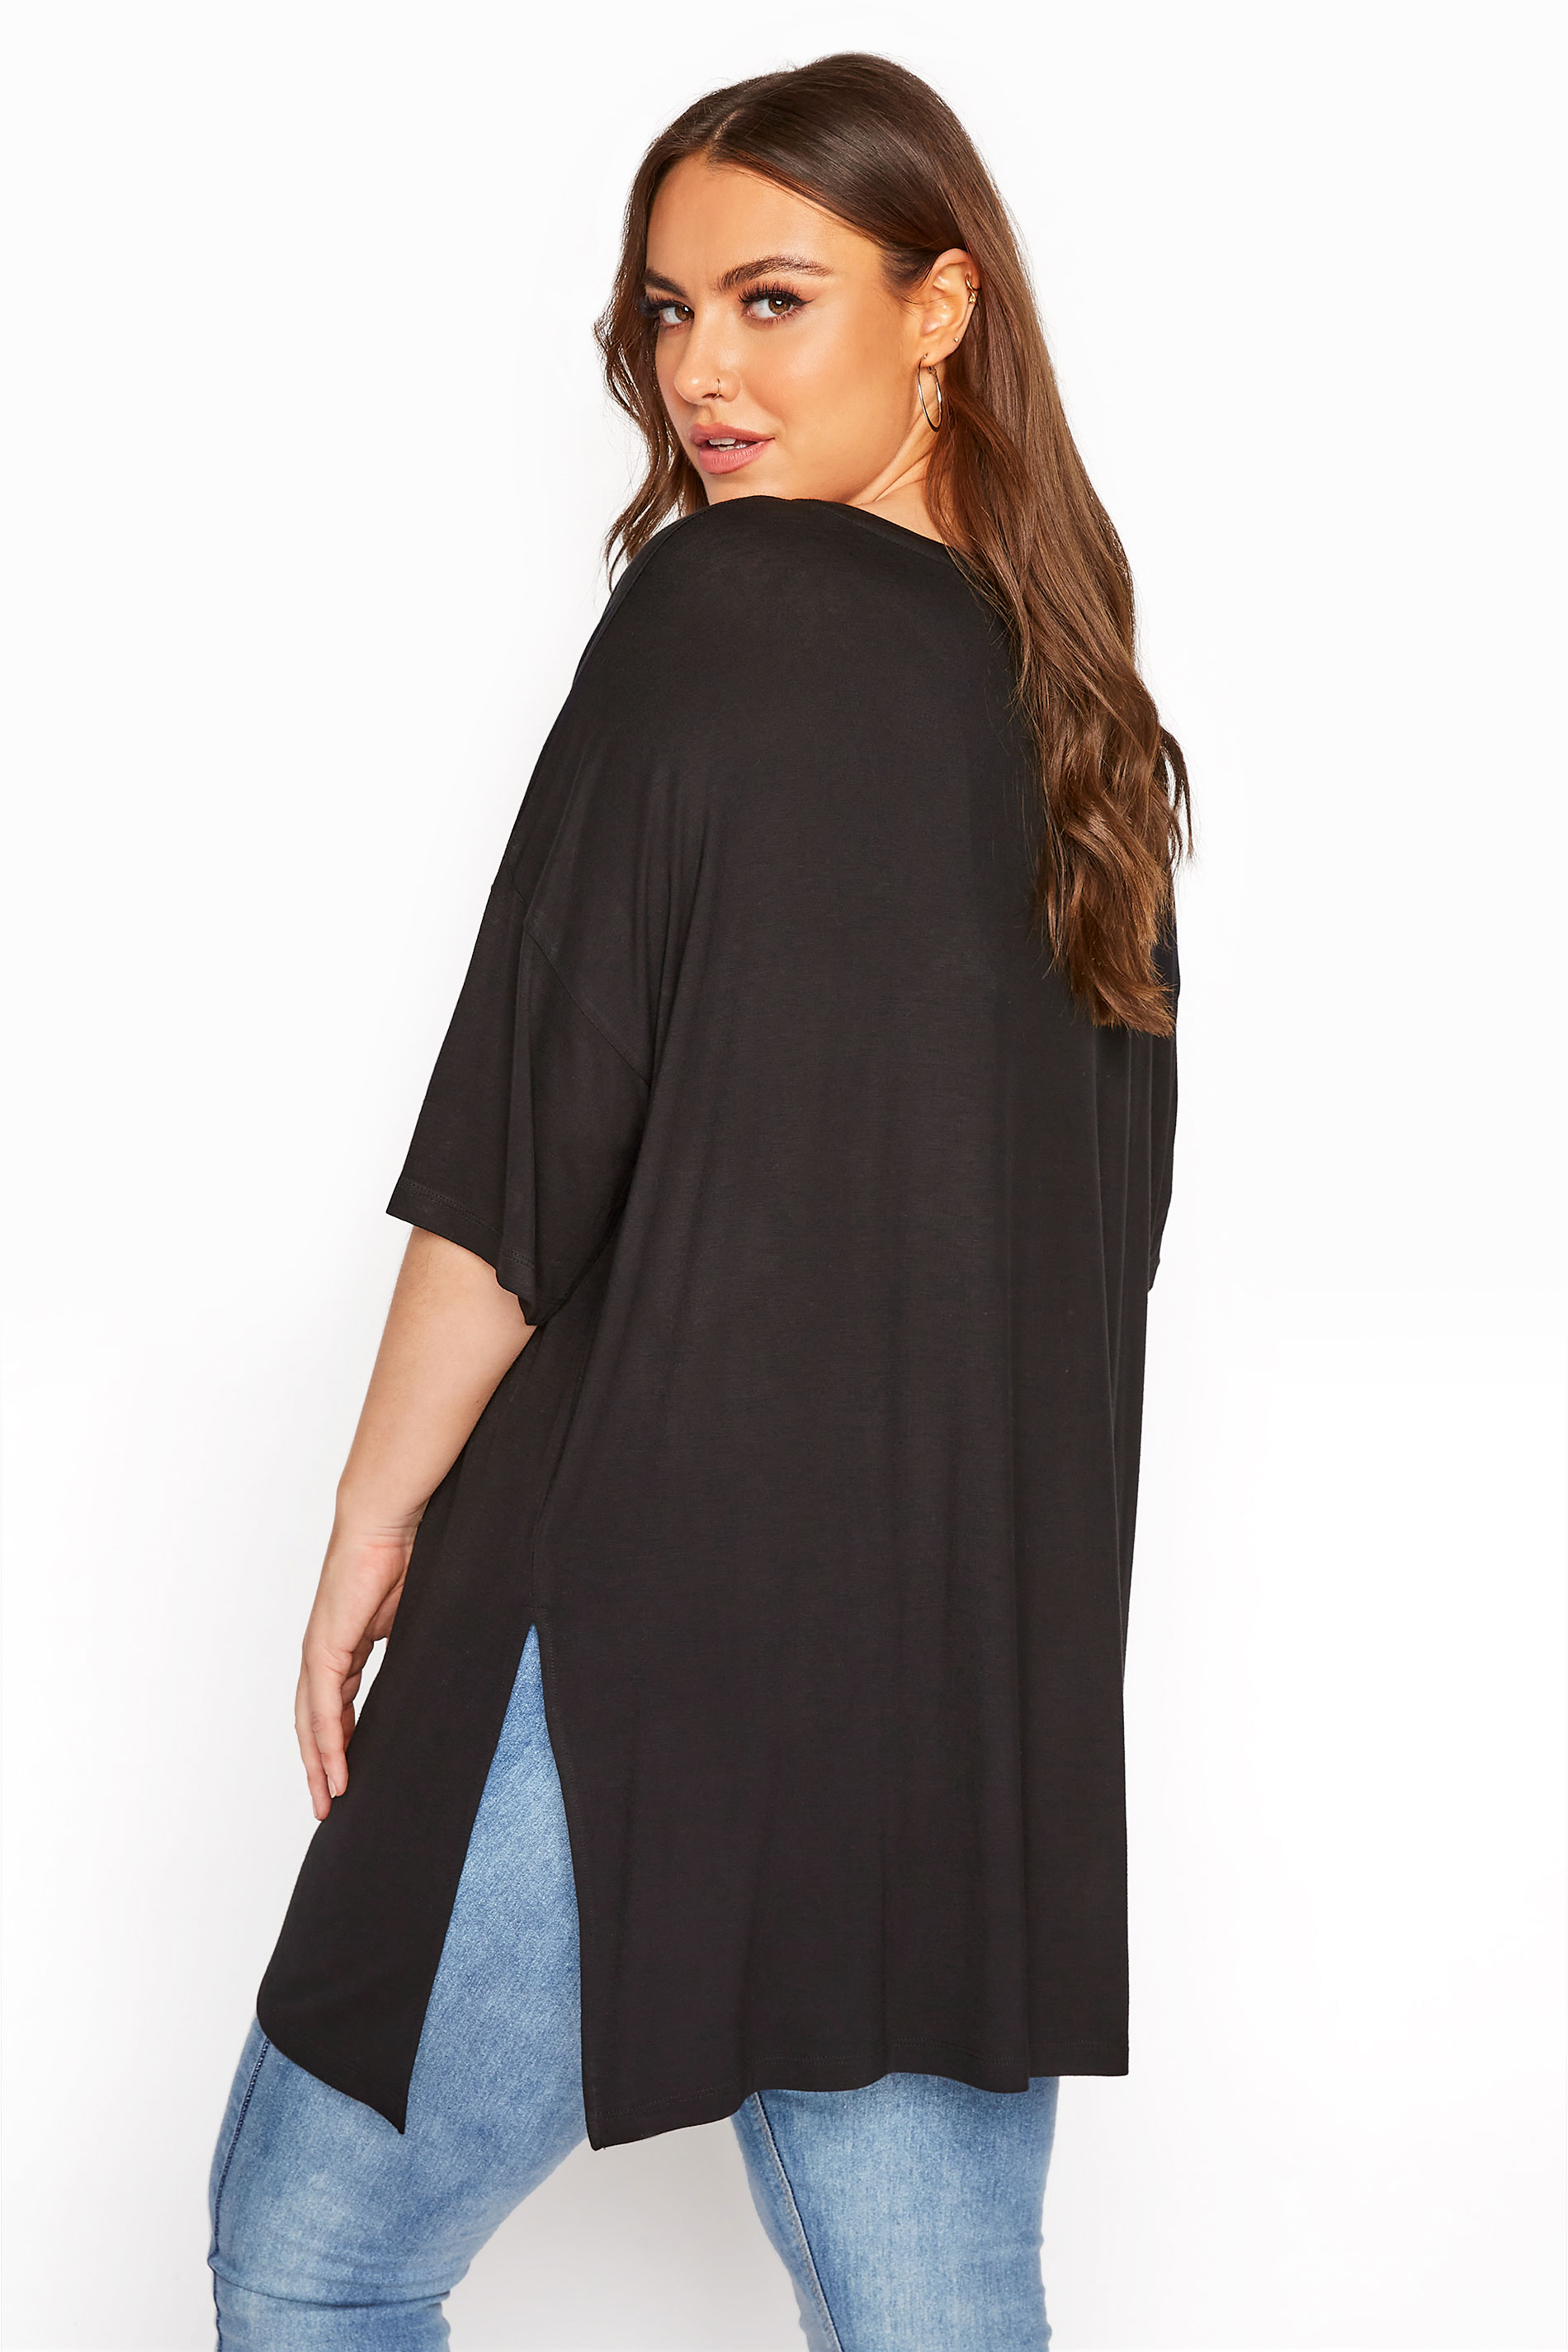 Grande taille  Tops Grande taille  Tops Casual | T-Shirt Noir Long Oversize - RJ51903